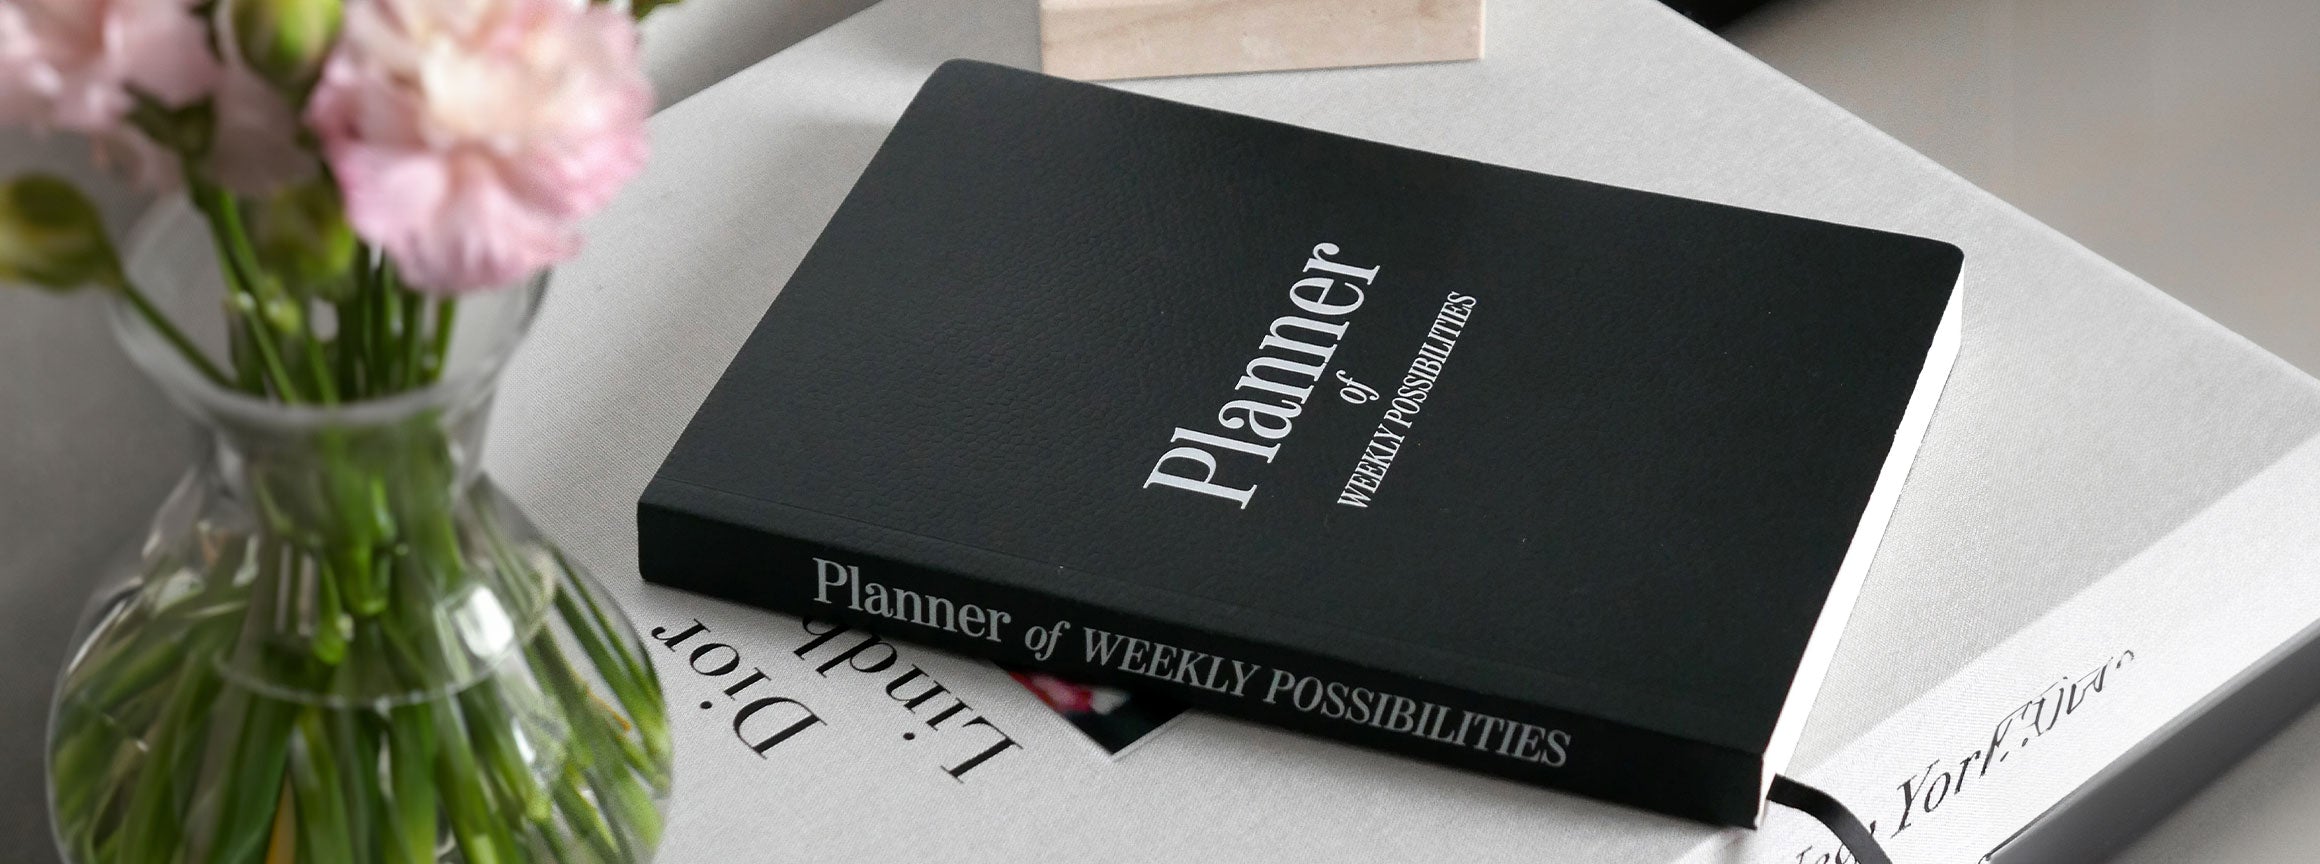 Planners & Notebooks